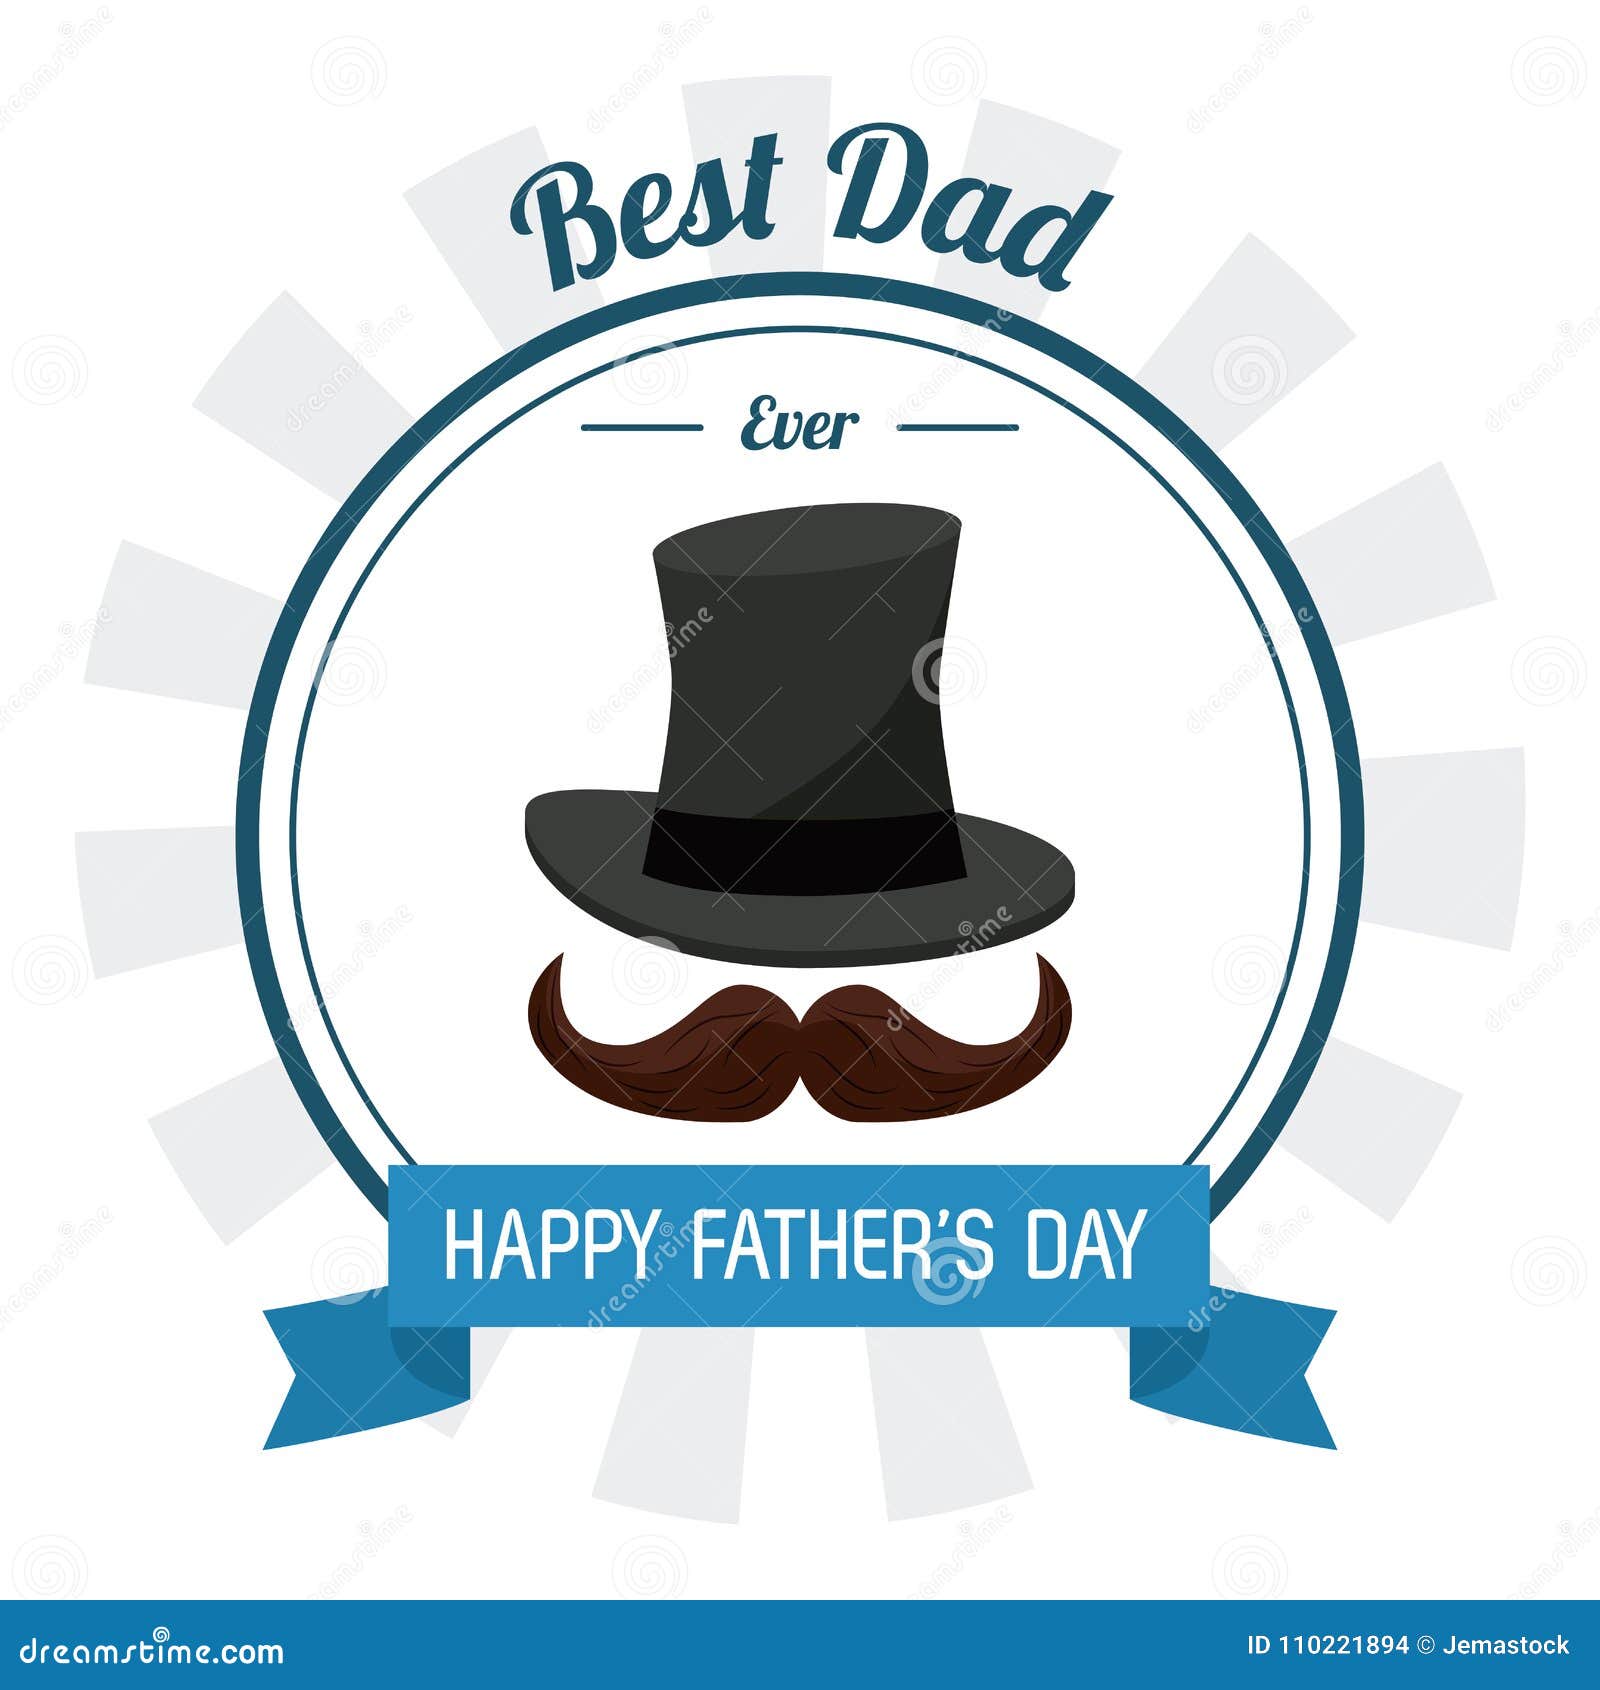 Fathers Day Card, Best Dad Ever. Hat Mustache Celebration Party